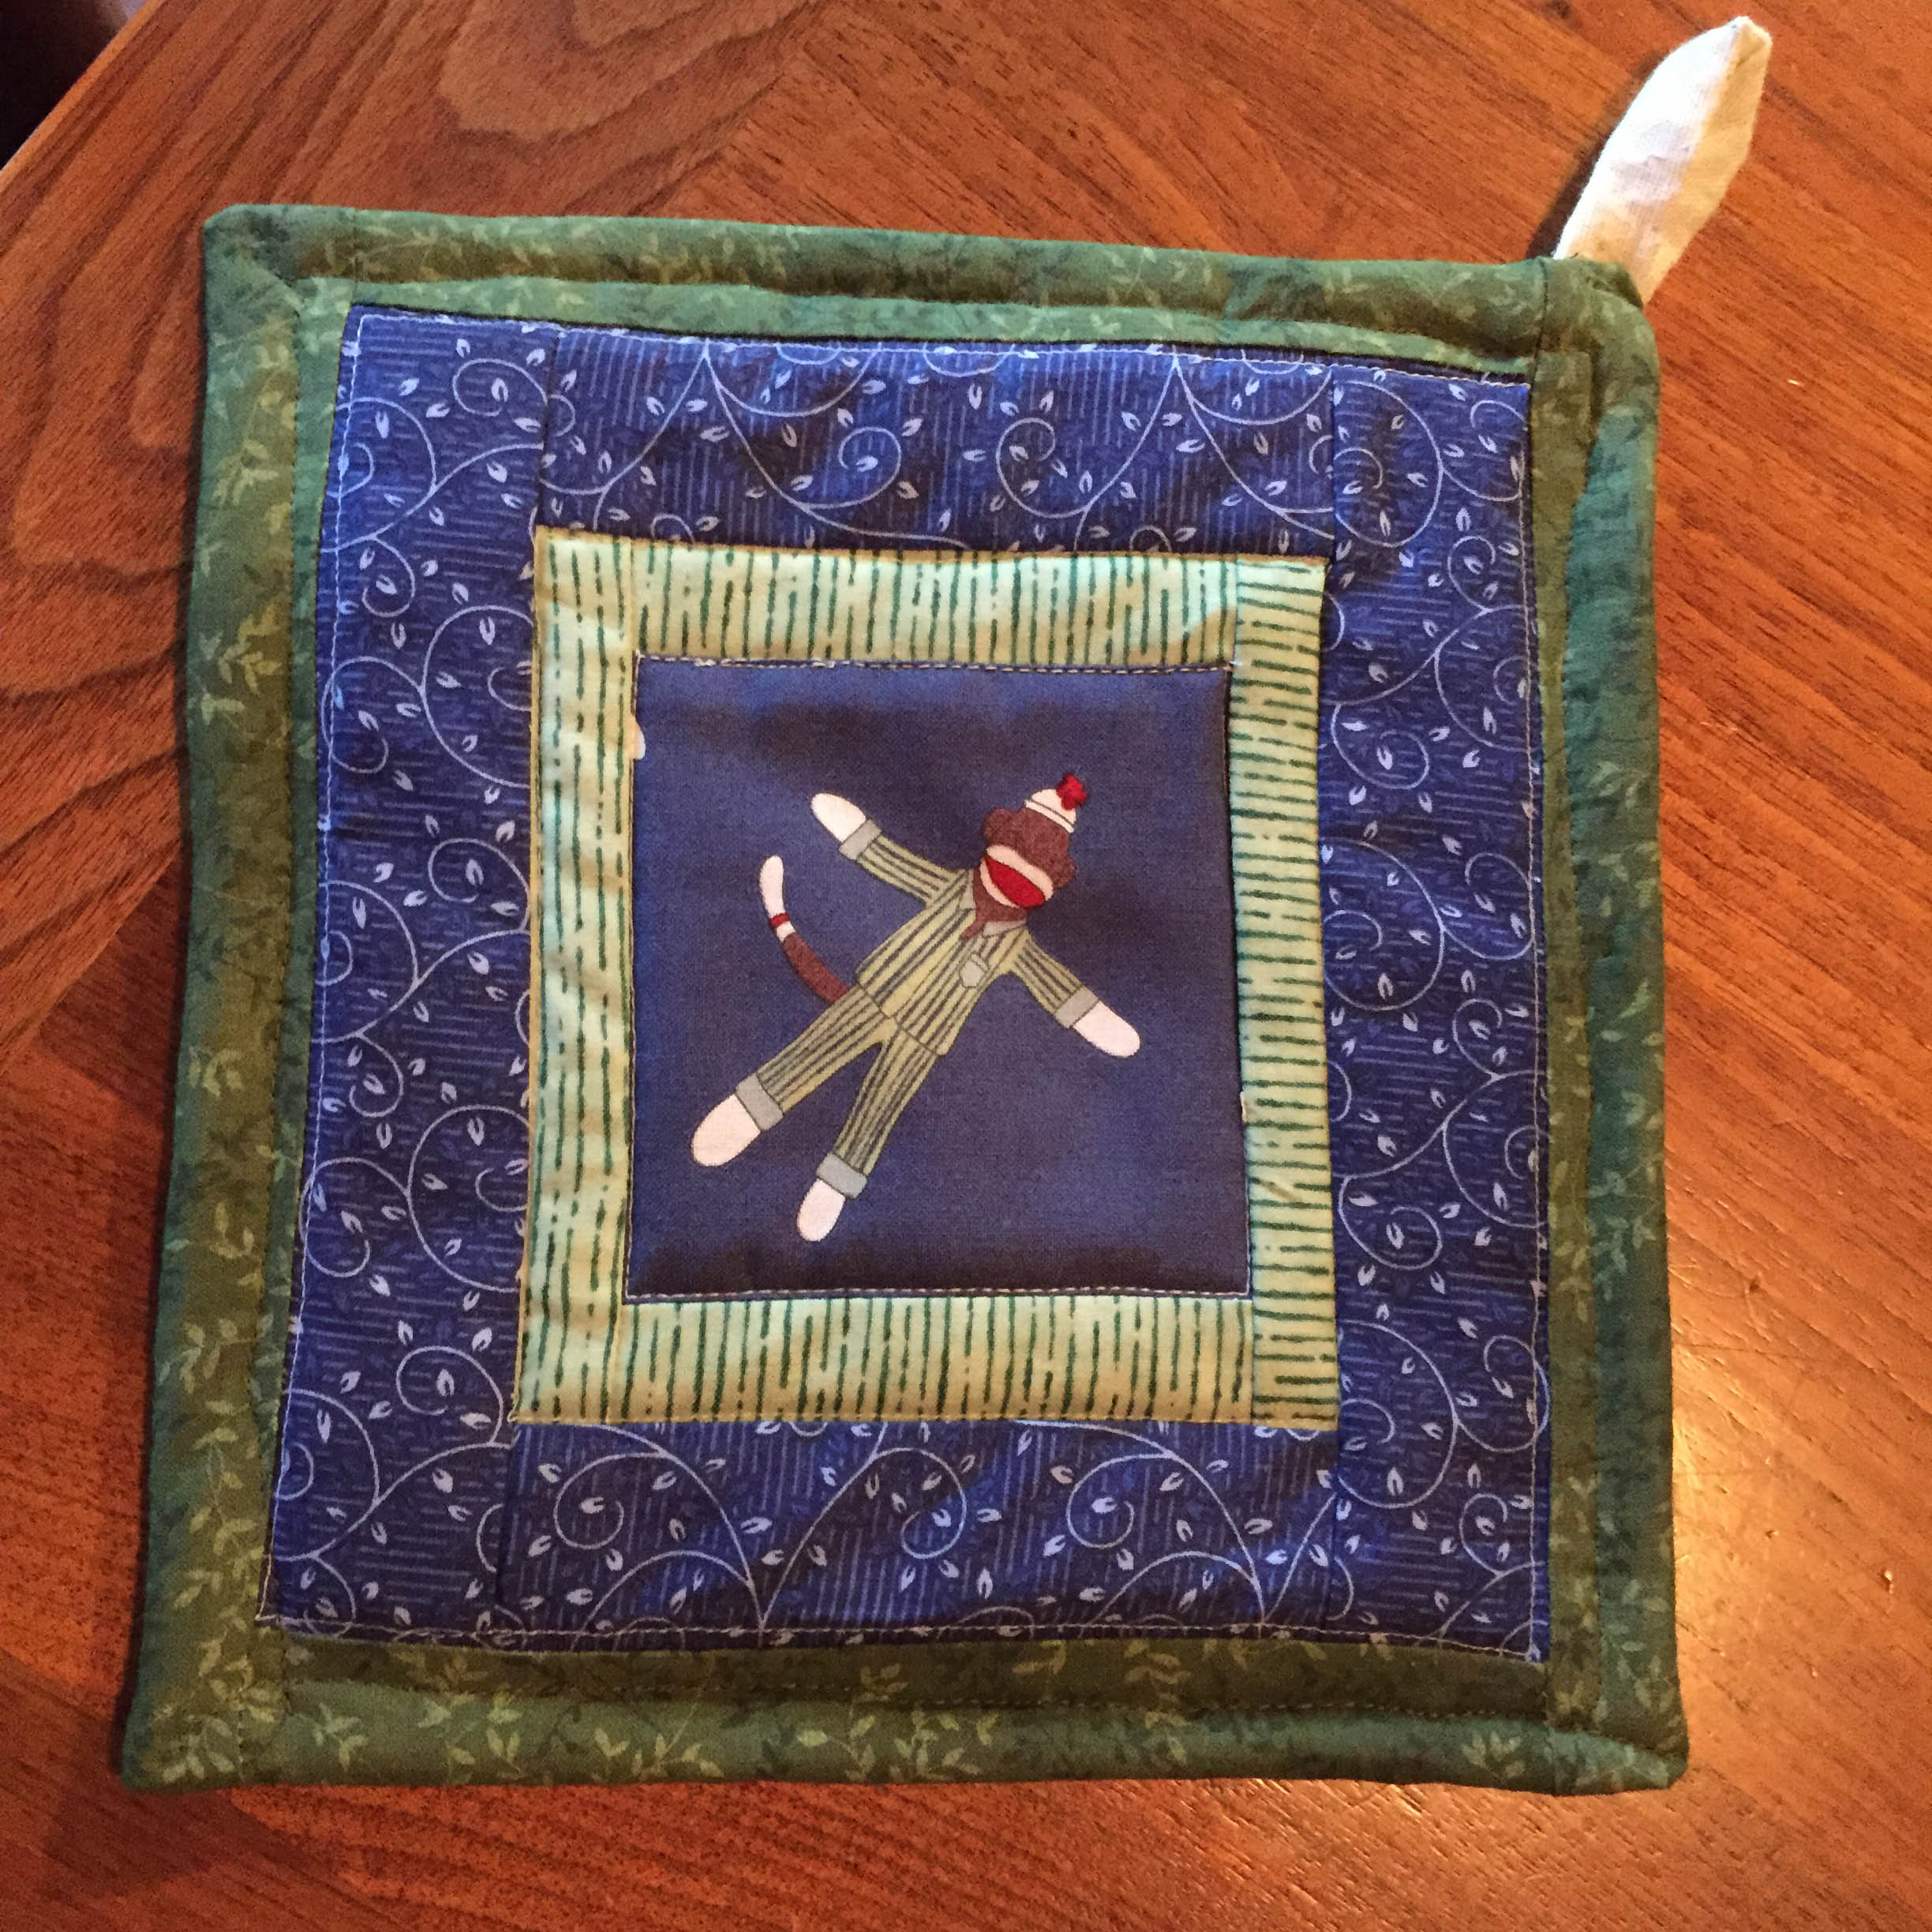 Kate made this potholder for Dad.